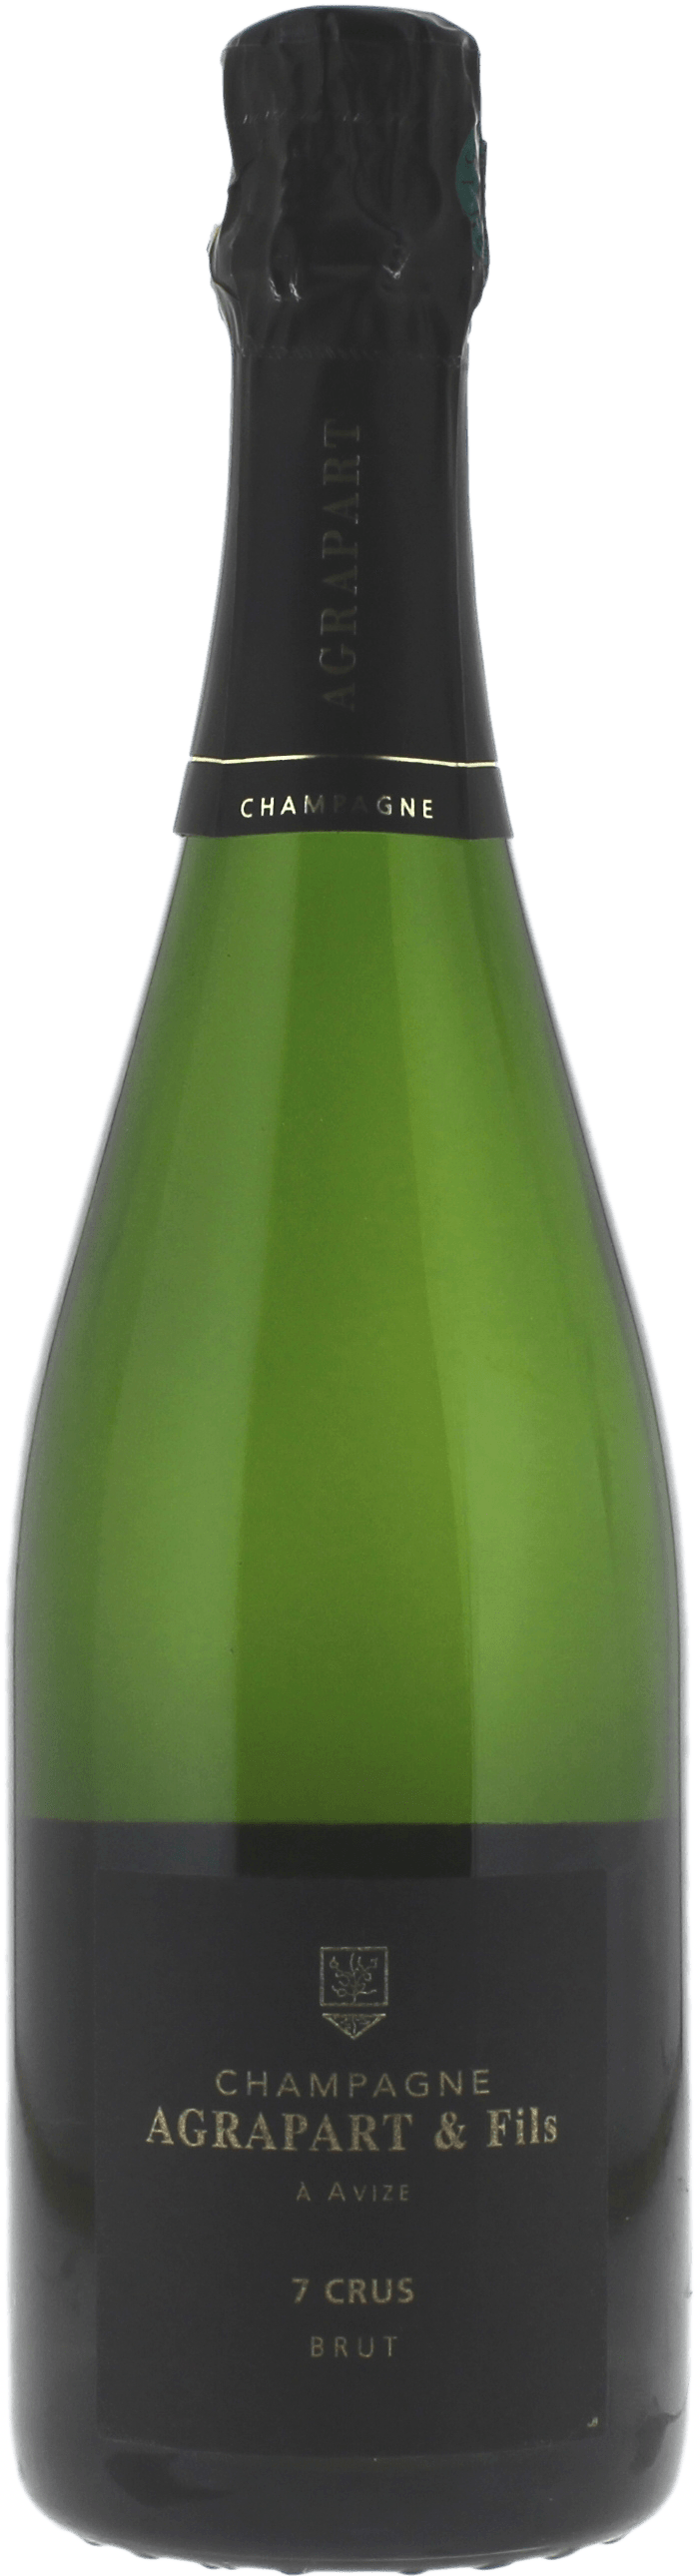 Agrapart  7 crus  Agrapart, Champagne